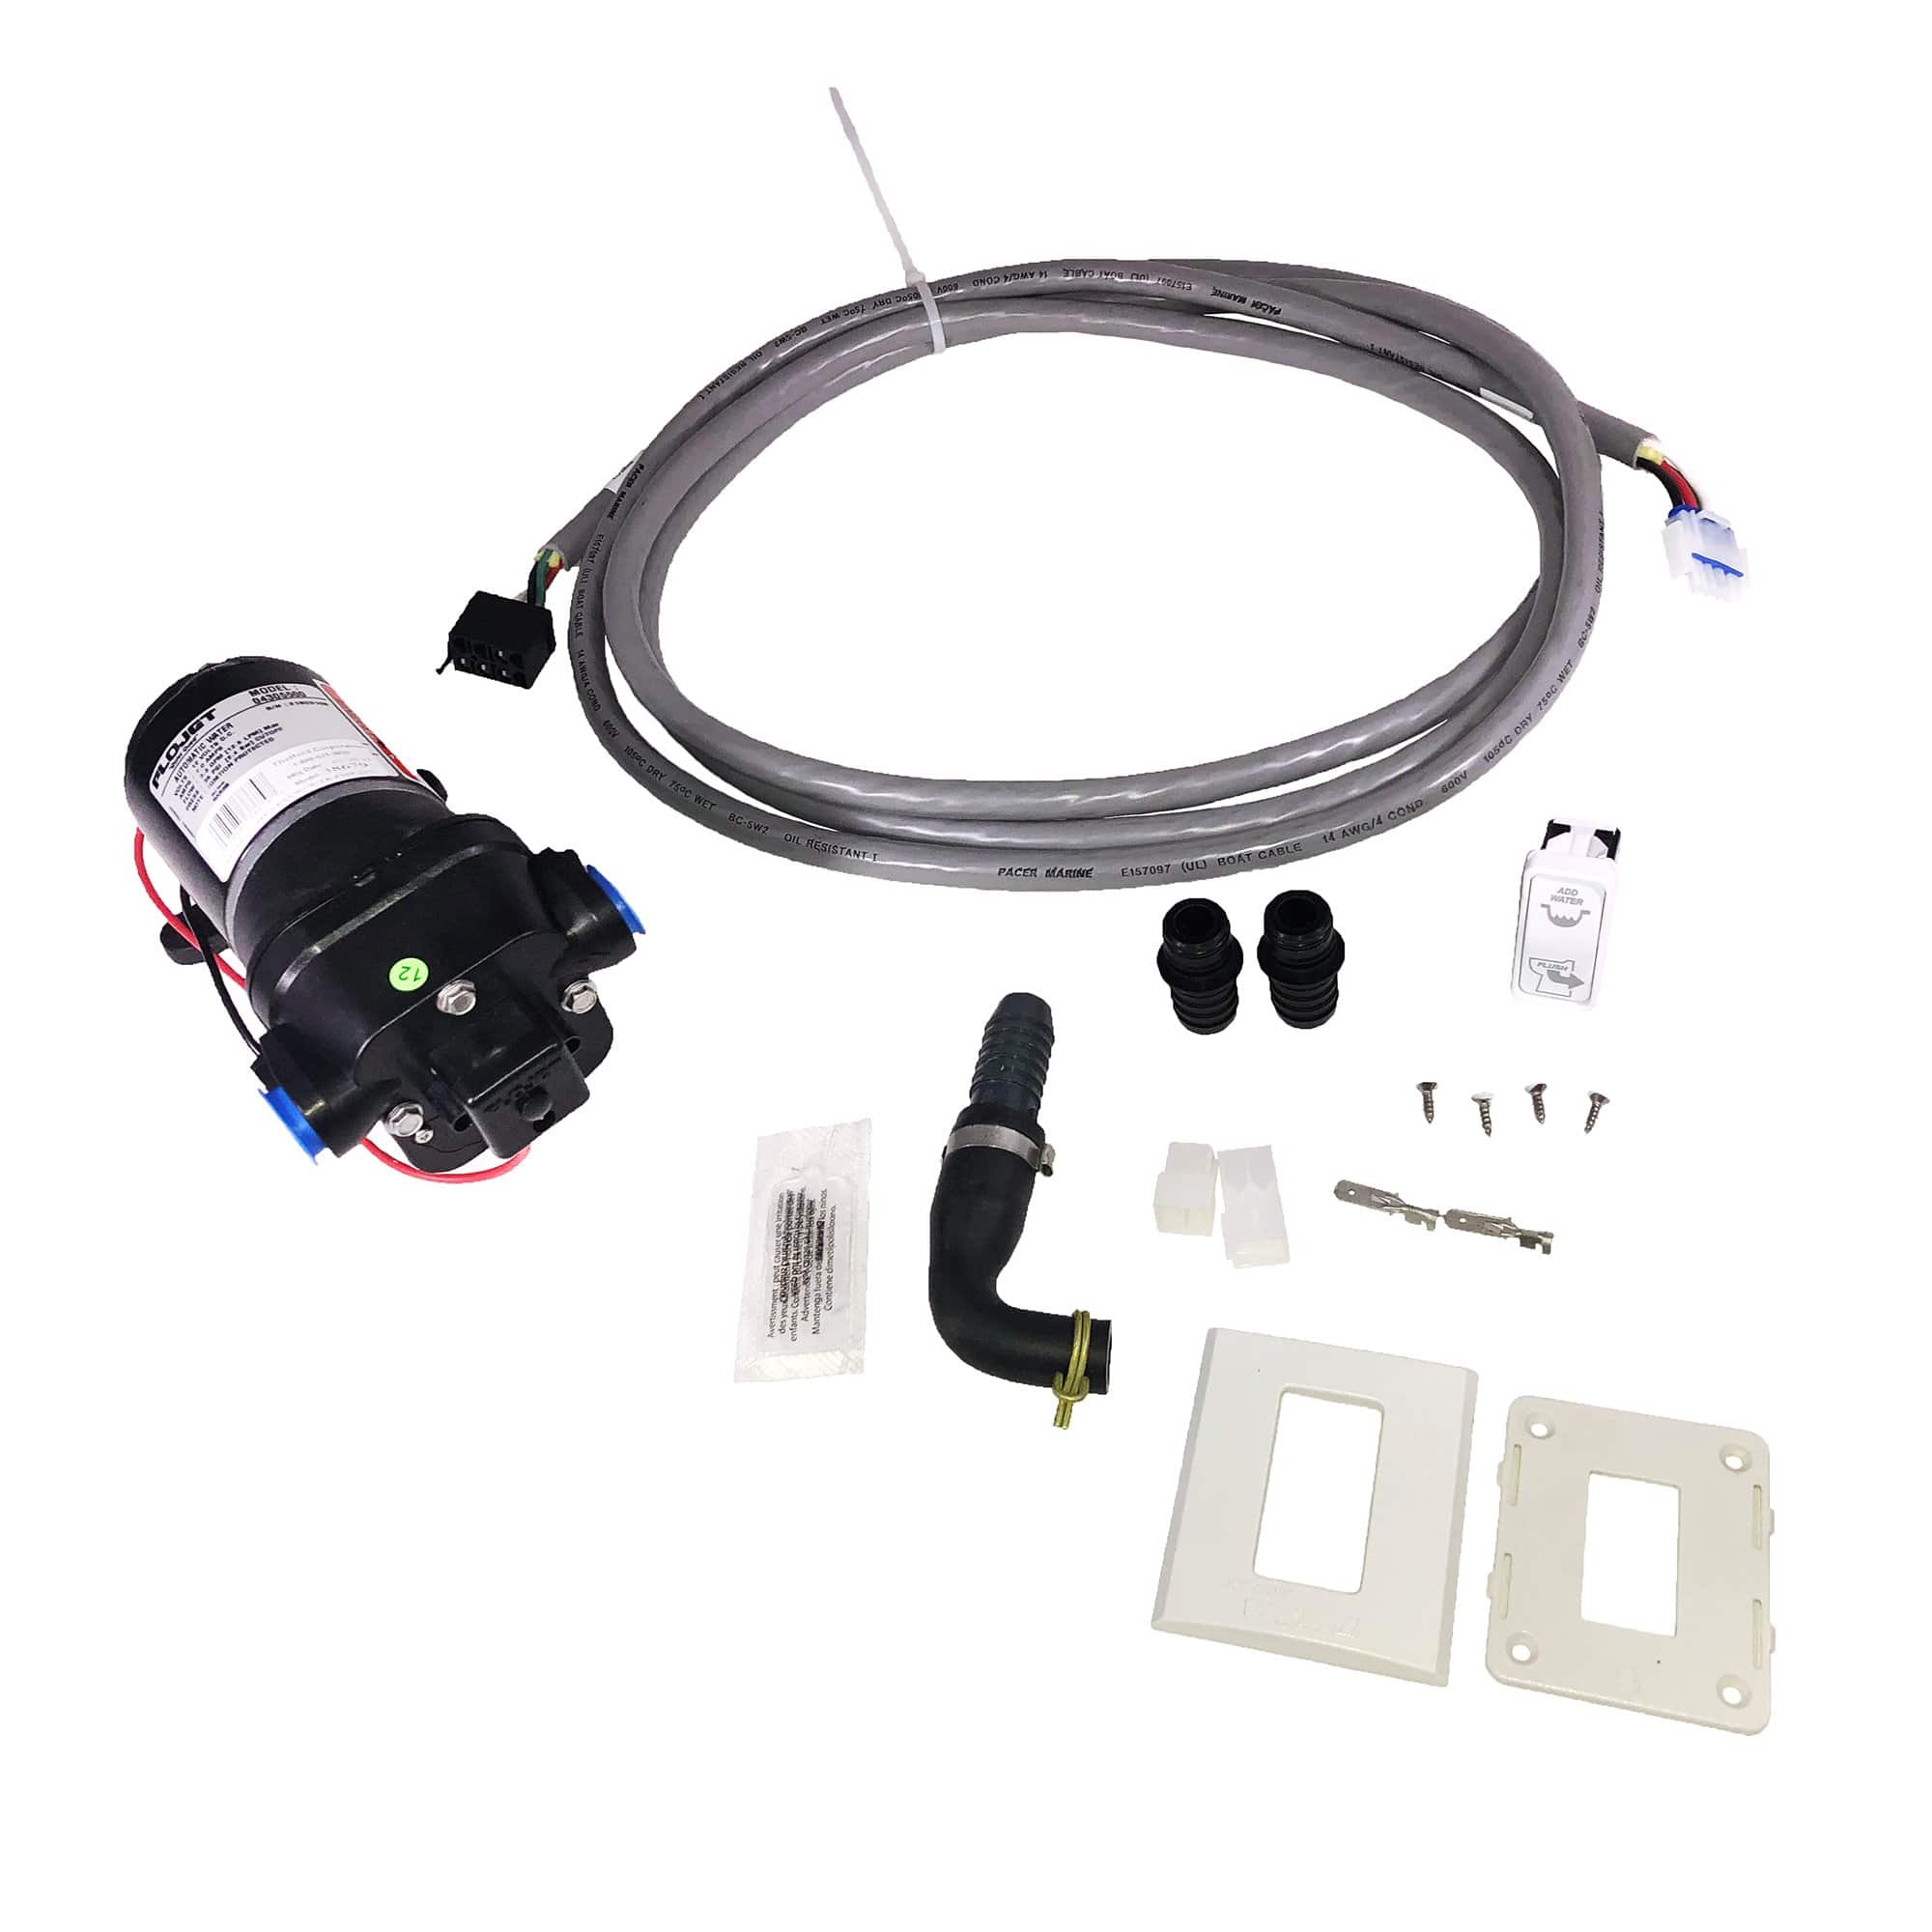 Thetford 38679 12V Raw Water Pump Replacement Kit